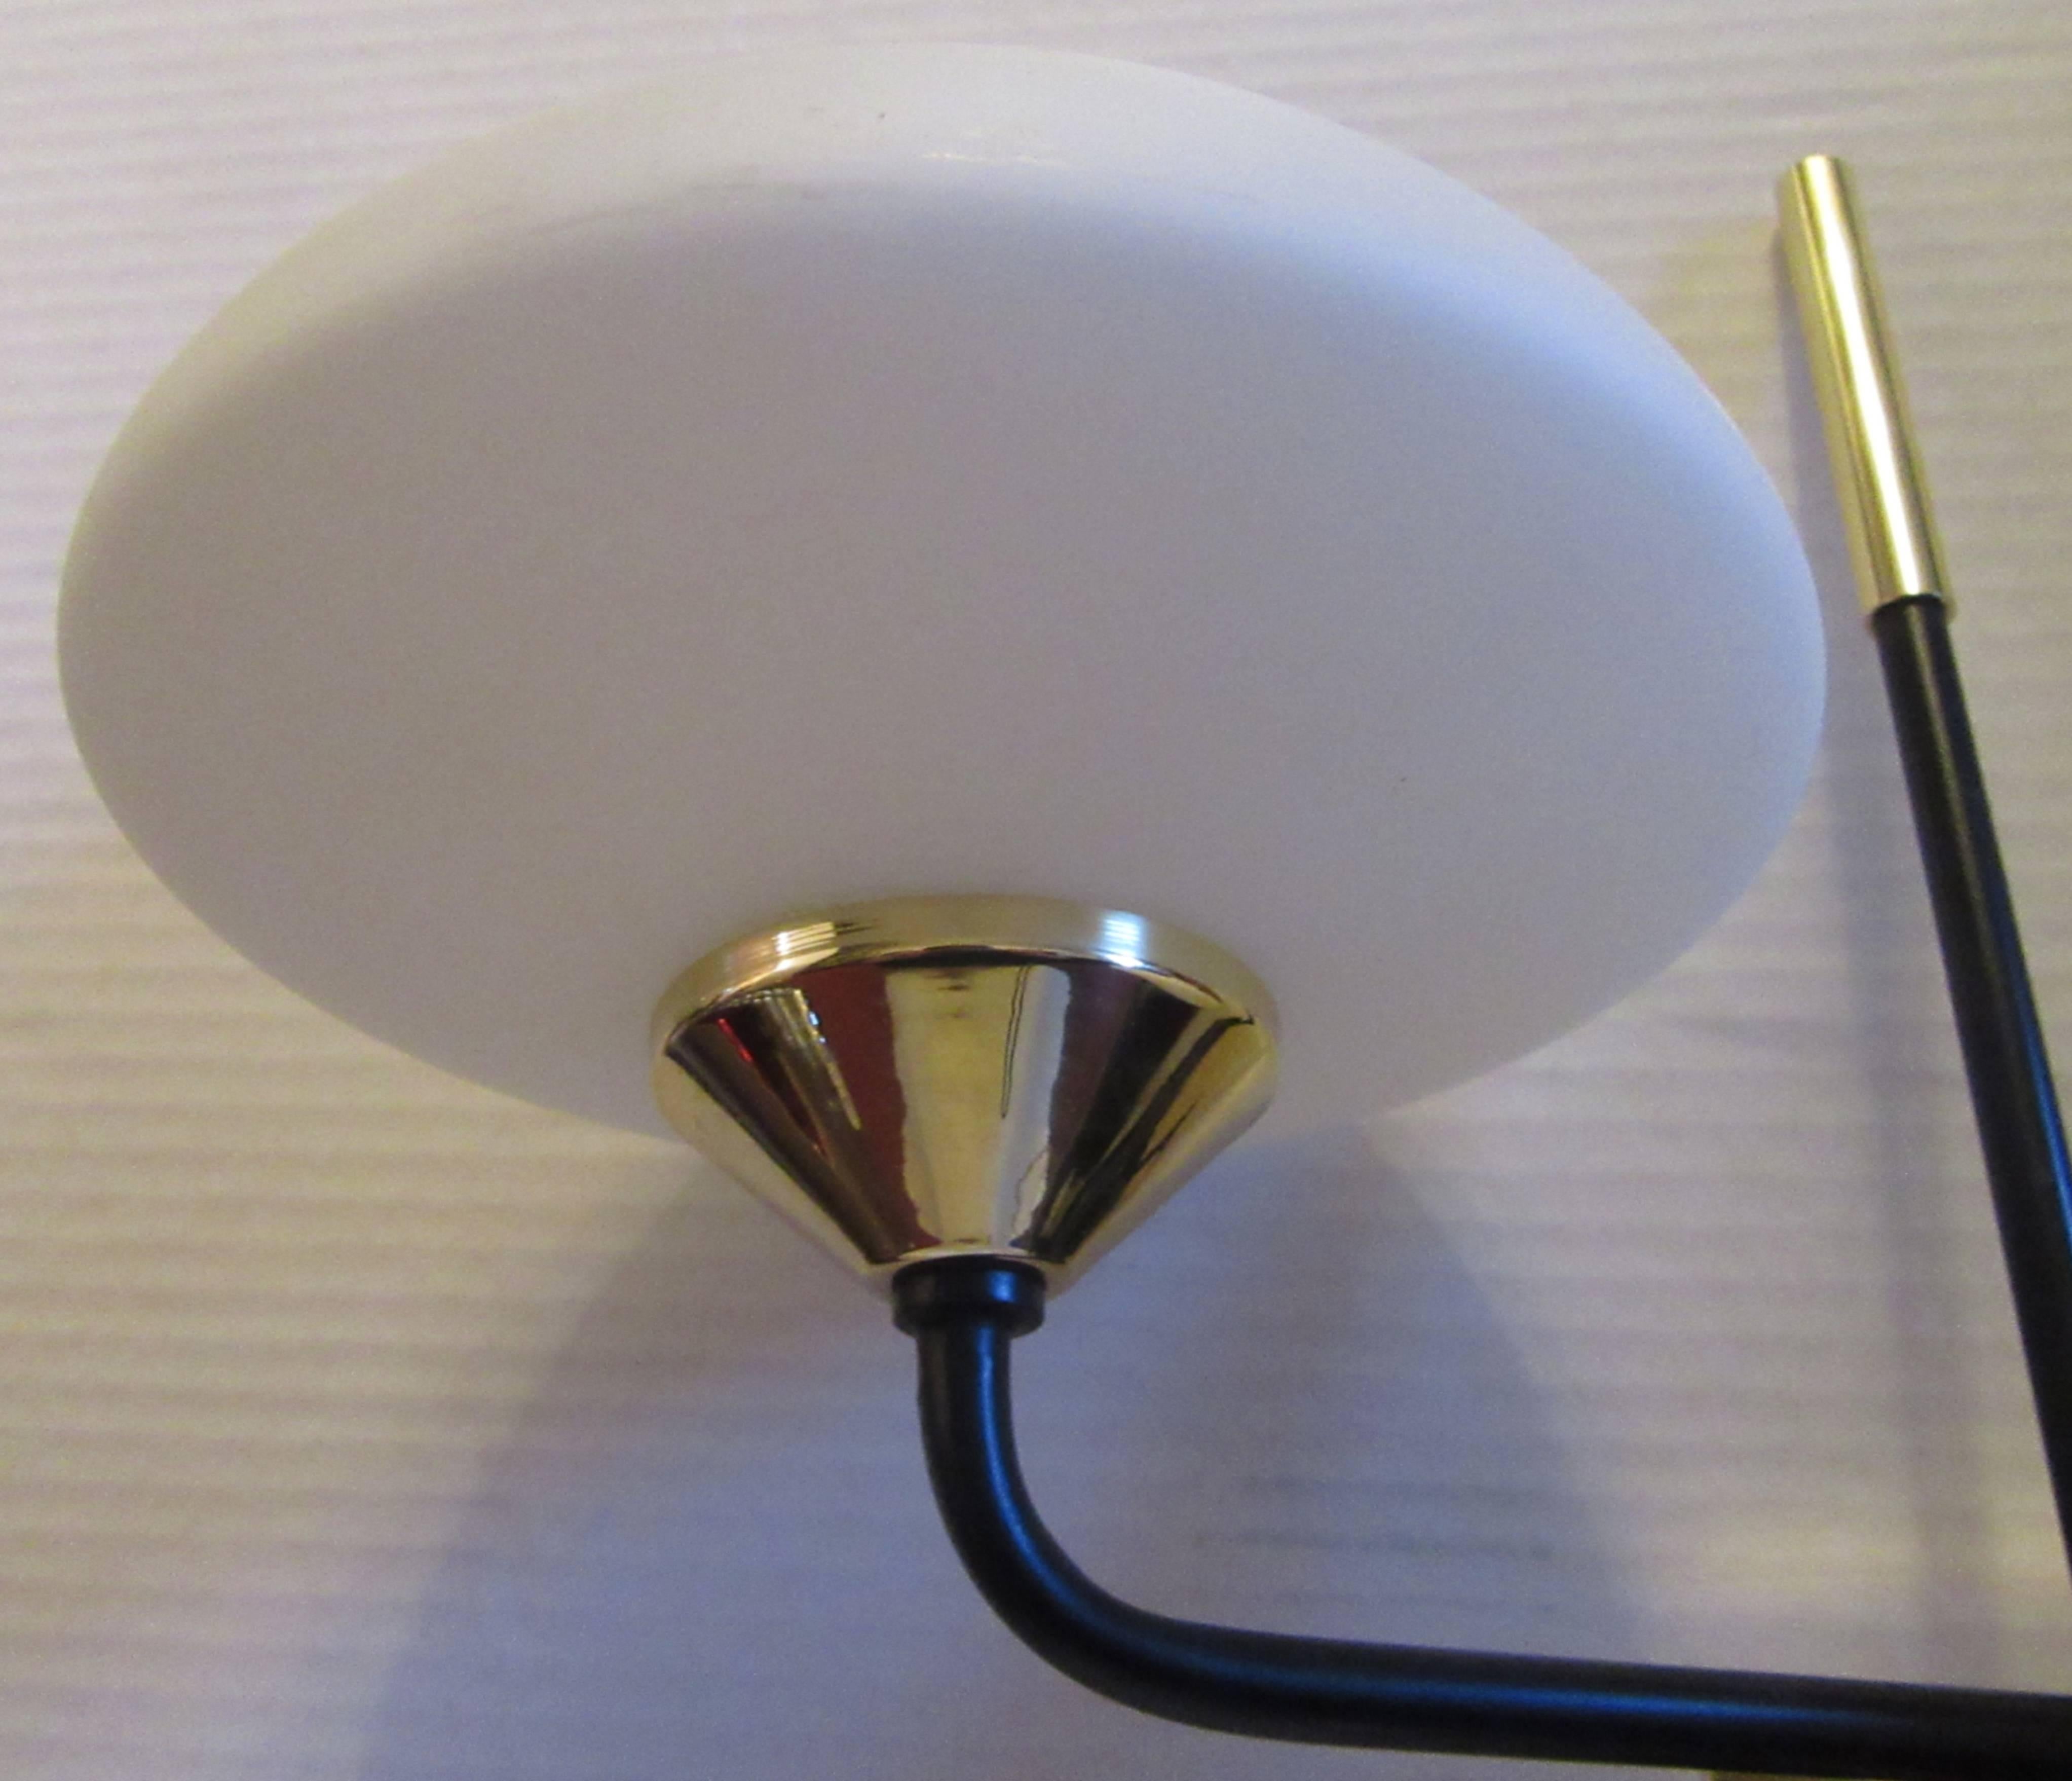 Simple and sleek brass and black metal wall lights with opaque white saucer form globe lights. All newly wired for the U.S., and a new brass backplate has been added for modern electrical.